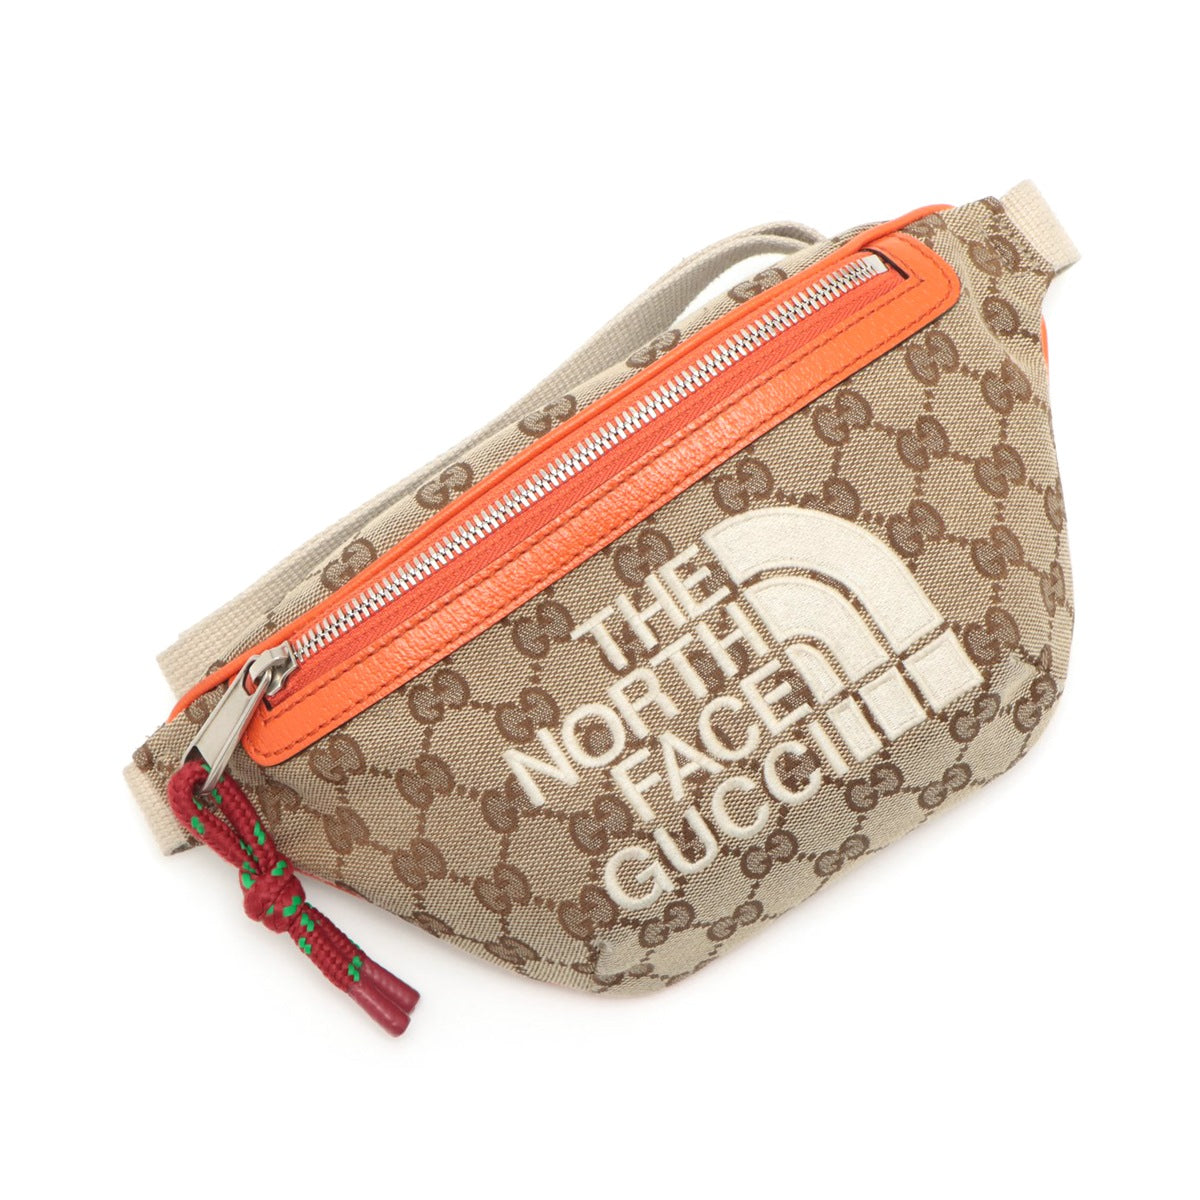 Gucci x North Face GG Canvas Canvas & leather Sling backpack Beige x orange 650299